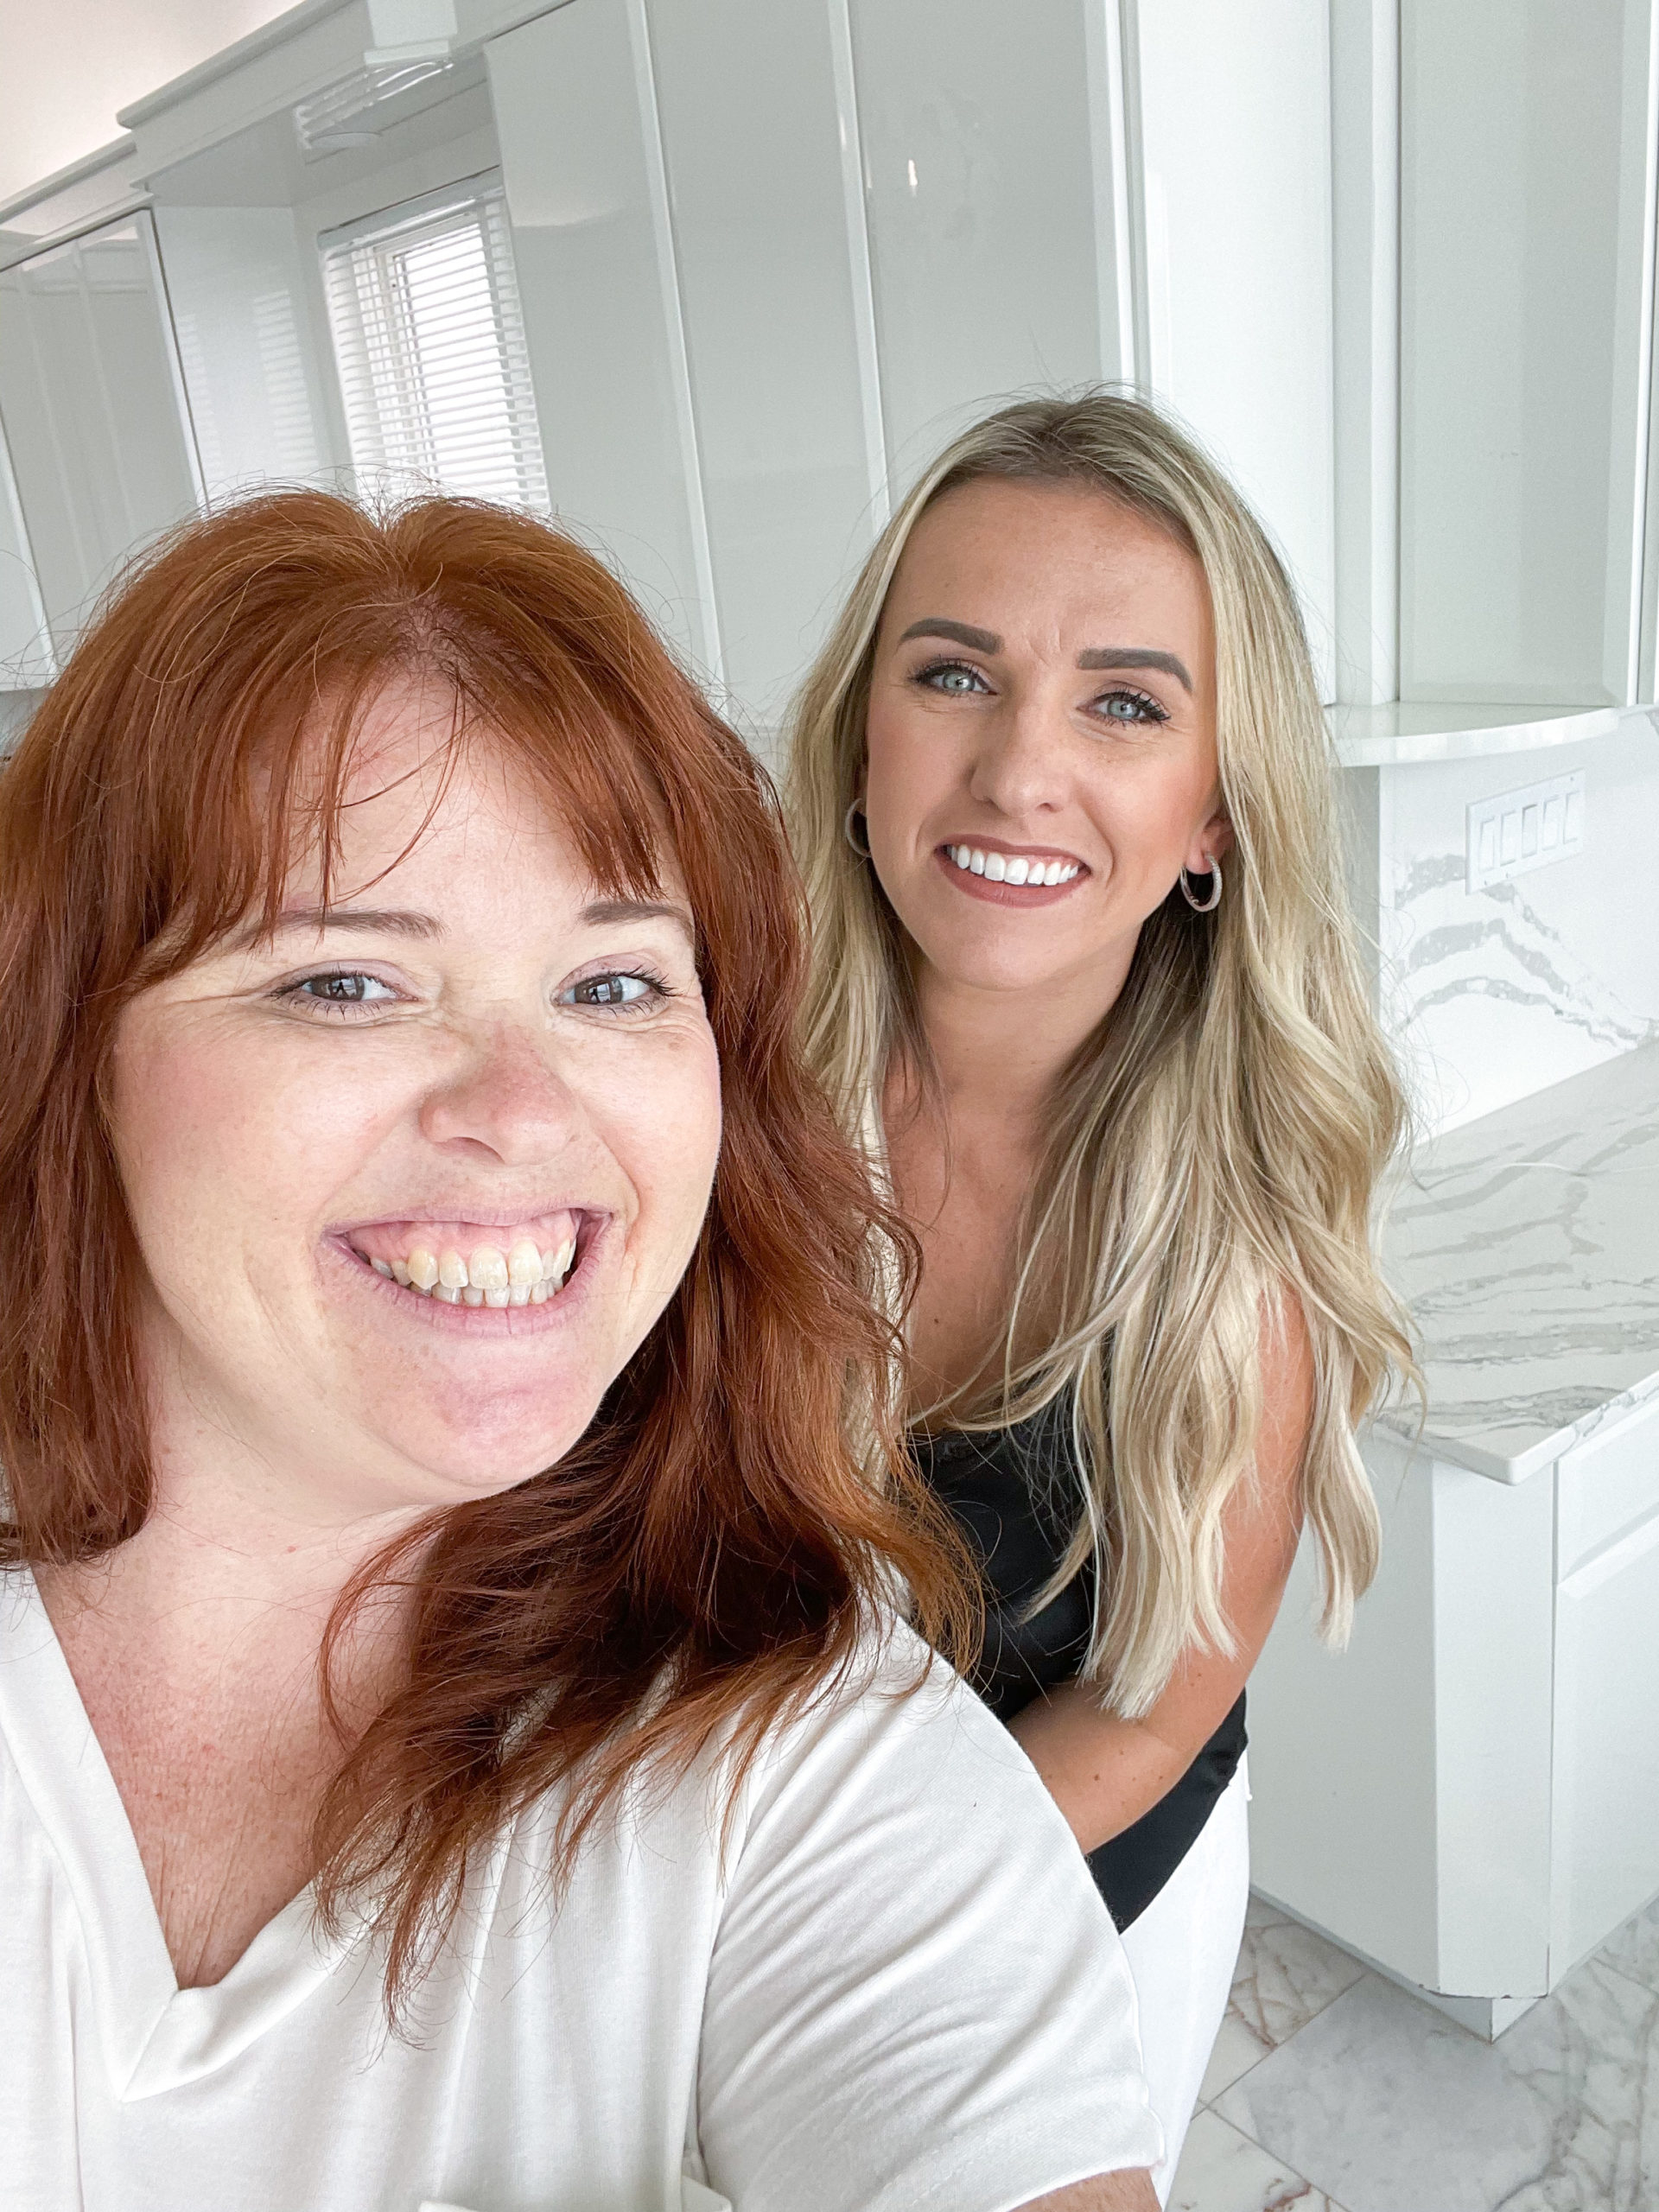 Sarasota Real Estate Agent Theresa Skrzypkowski. Click here to get inspired by this agent's fun and playful photoshoot in a luxury home!